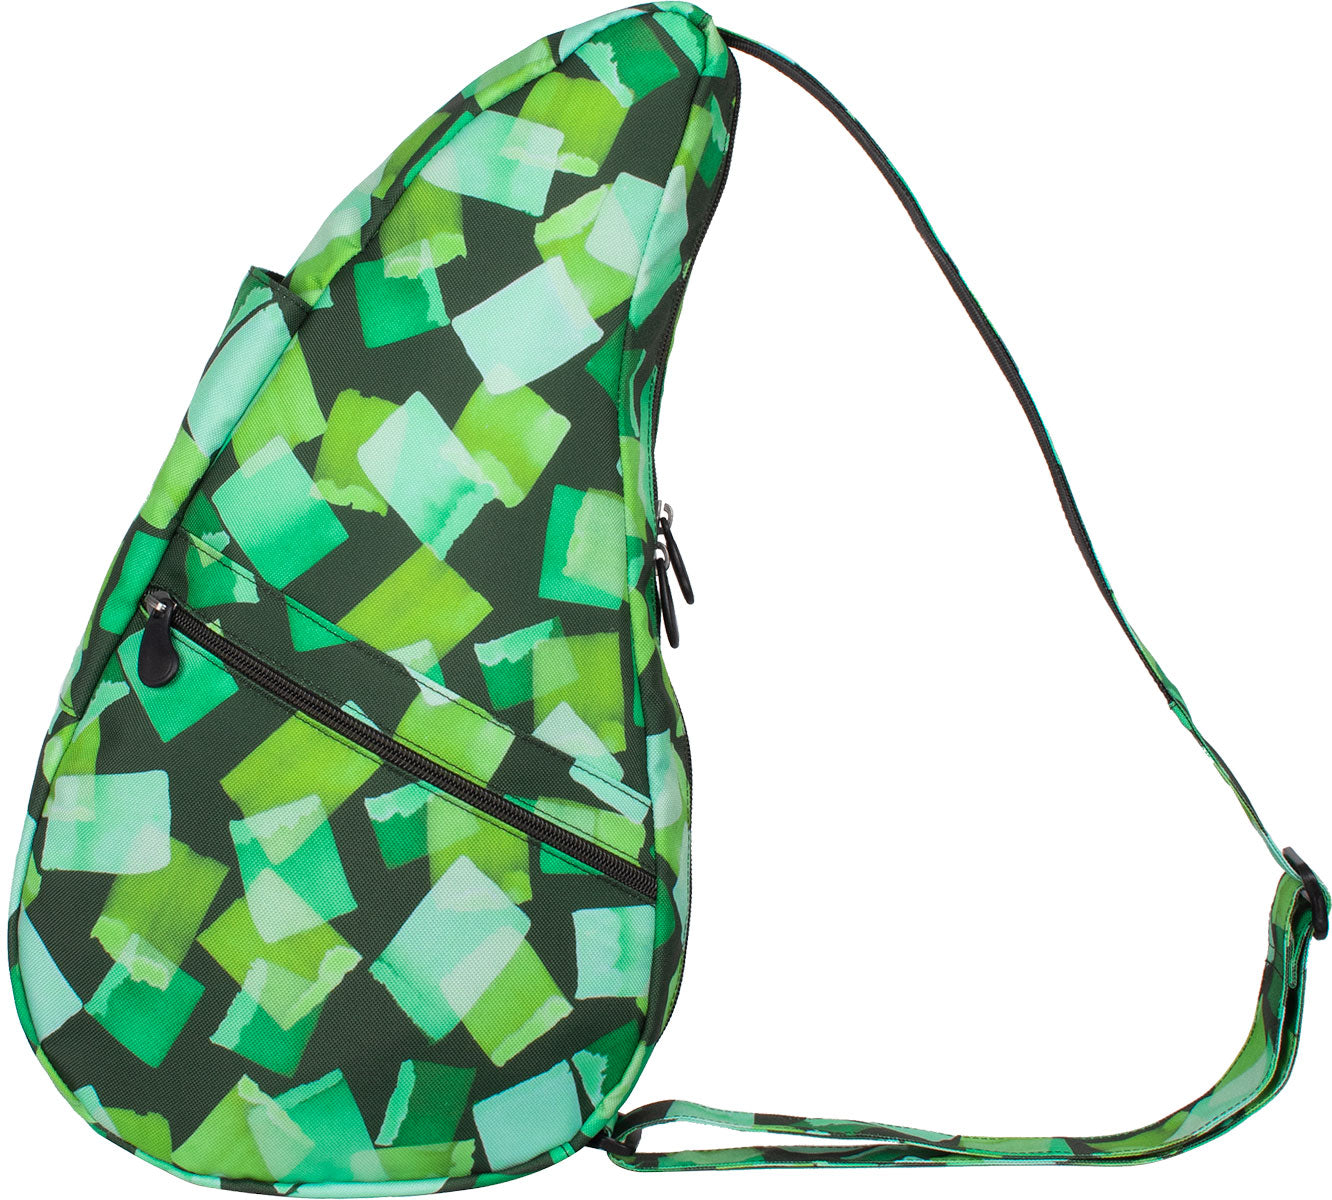 Ameribag Small Healthy Back Bag Tote Prints and Patterns Color: Night glow